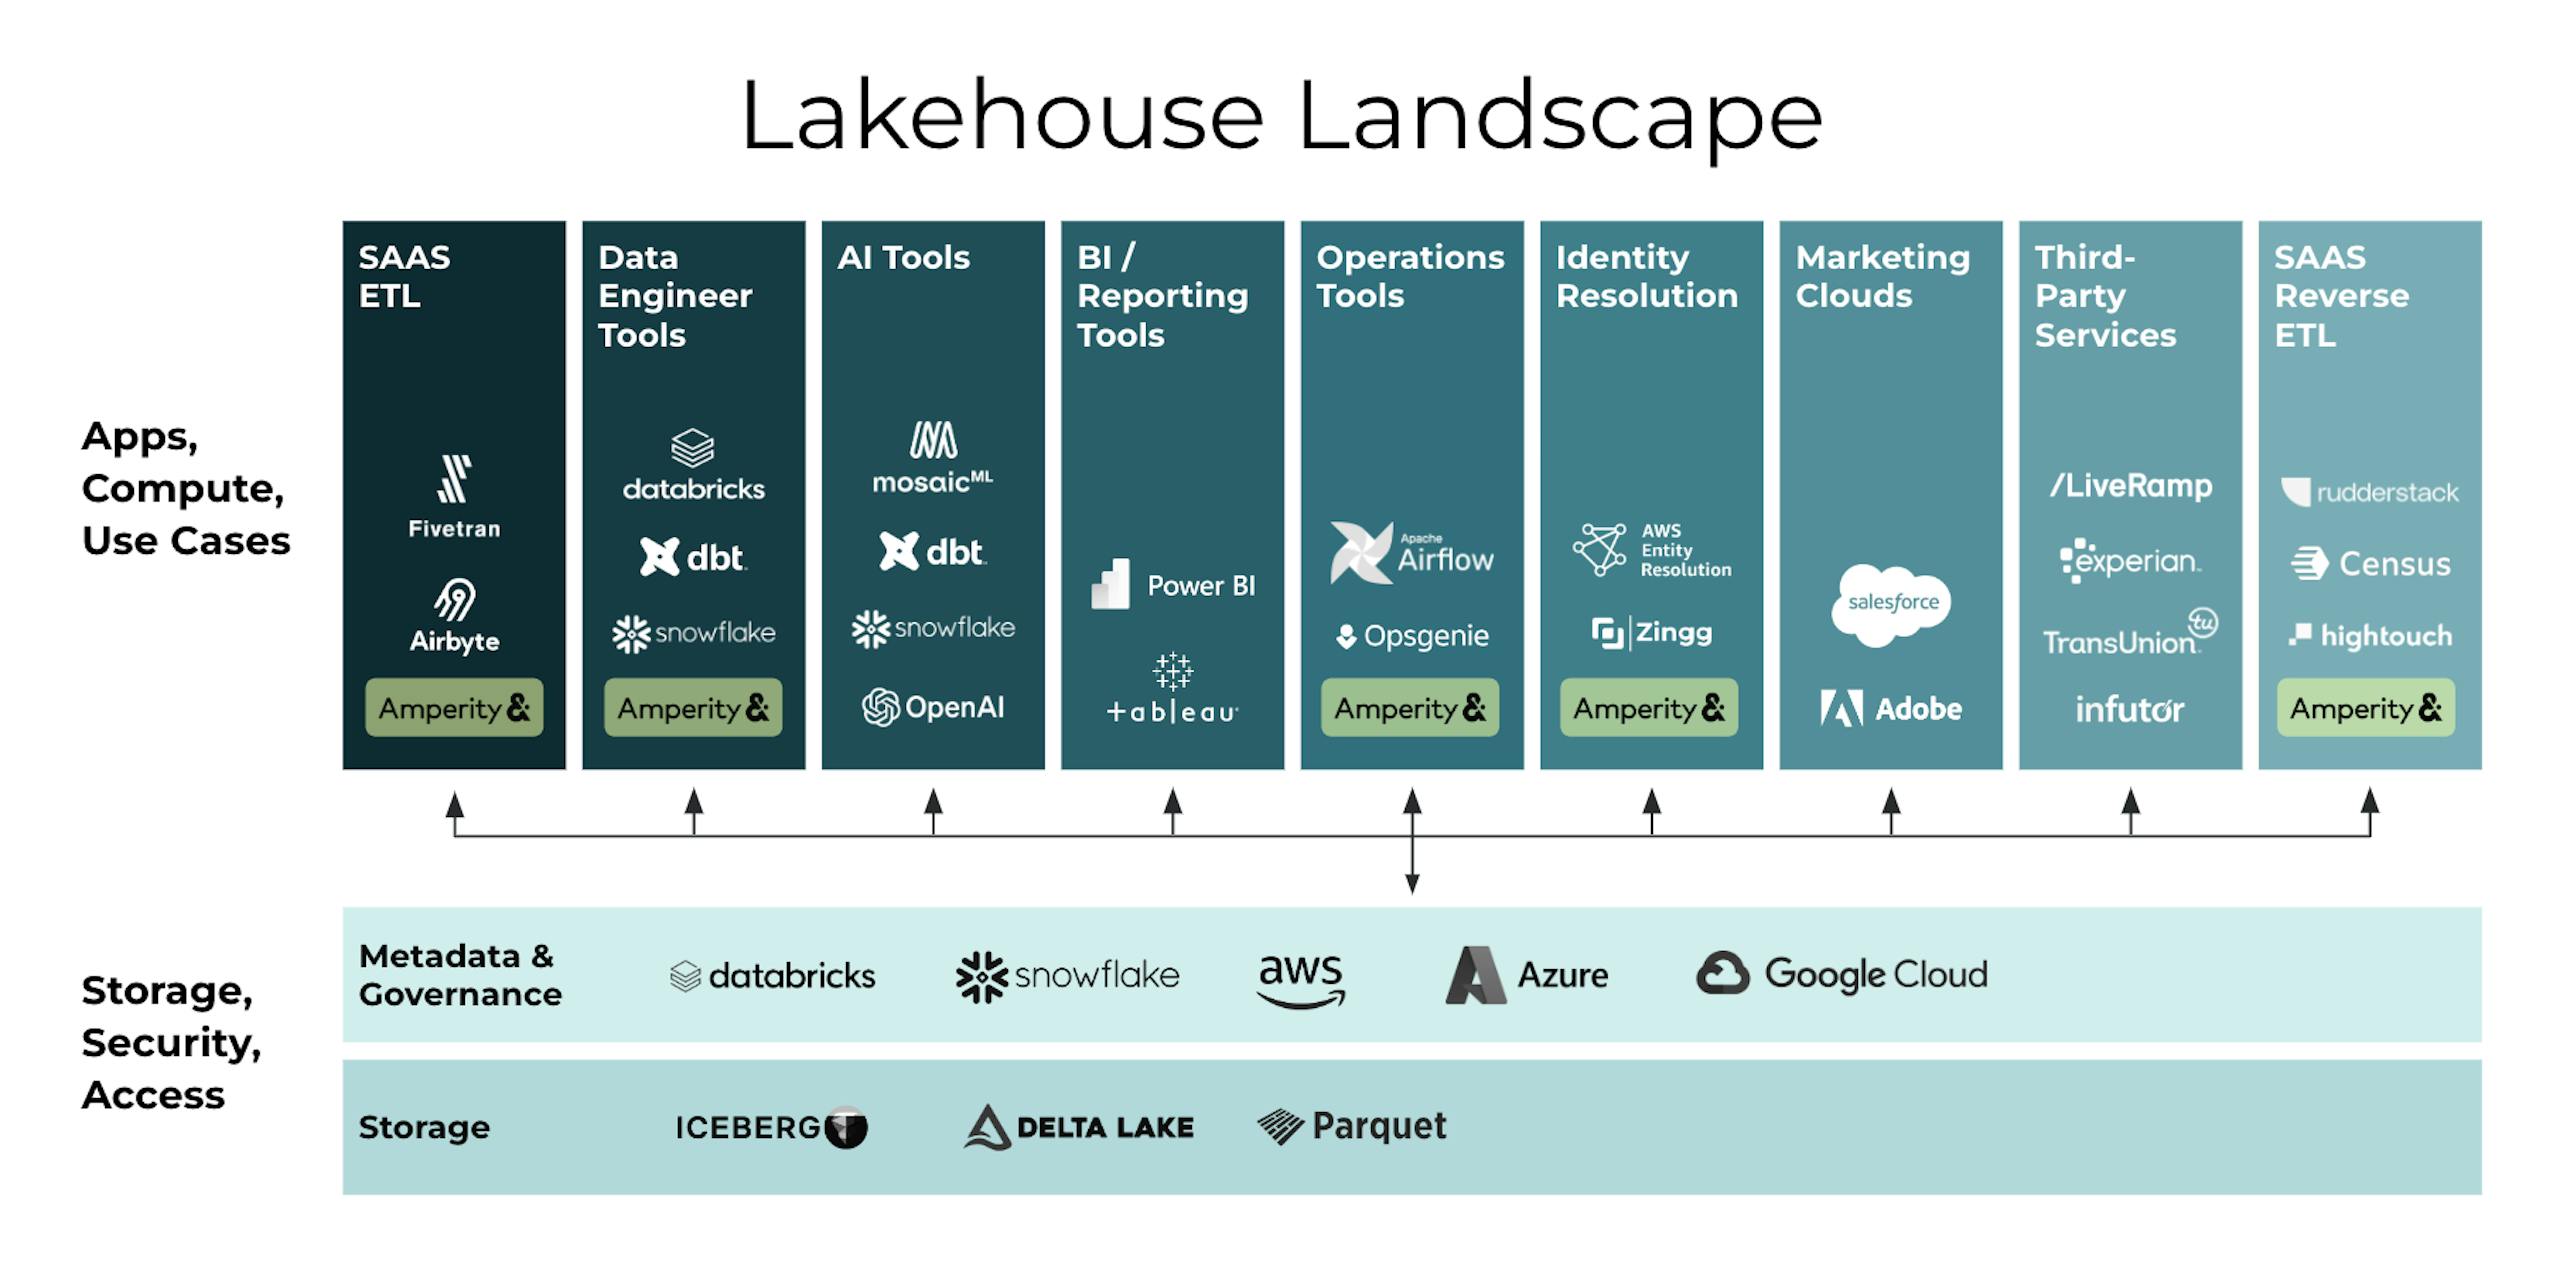 An image showing the architecture of the Data Lakehouse Landscape. At the bottom is a storage layer where data is kept in Iceberg, Delta Lake, and Parquet tables; above that is a Metadata and Governance layer. Connecting into these are various apps, tools, and use cases where compute happens. The main points of the diagram is that compute is separated from storage, and that Amperity accounts for more than half of the functions that would need to interface with stored data, including ETL, Data Engineer Tools, Operations Tools, Identity Resolution, and Reverse ETL.